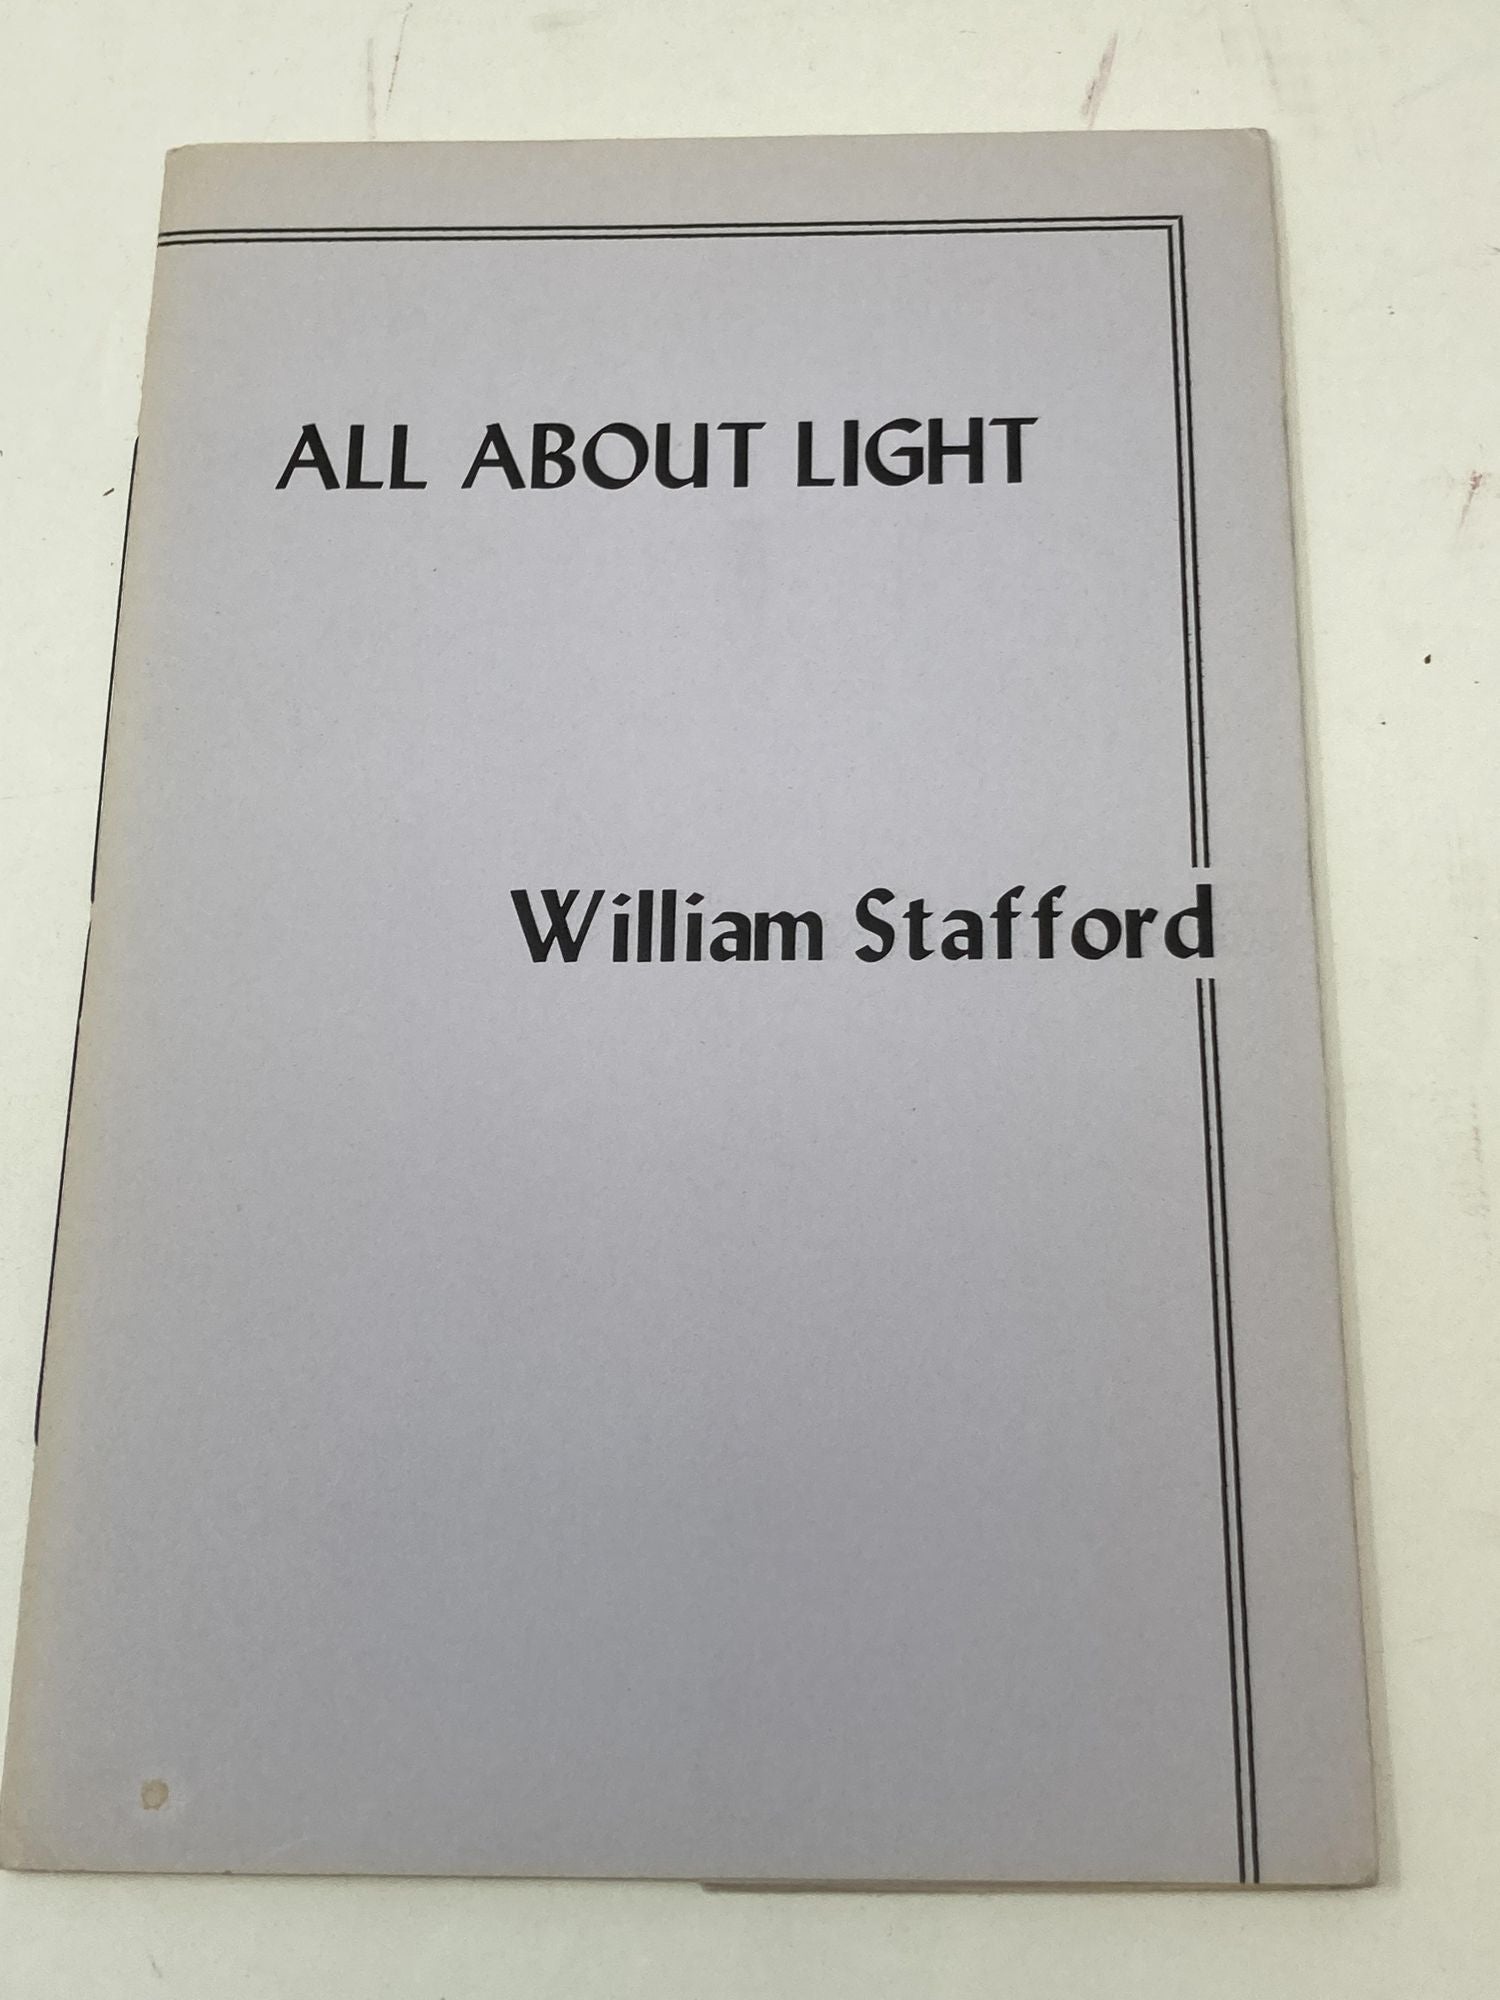 Stafford, William - All About Light (Signed)